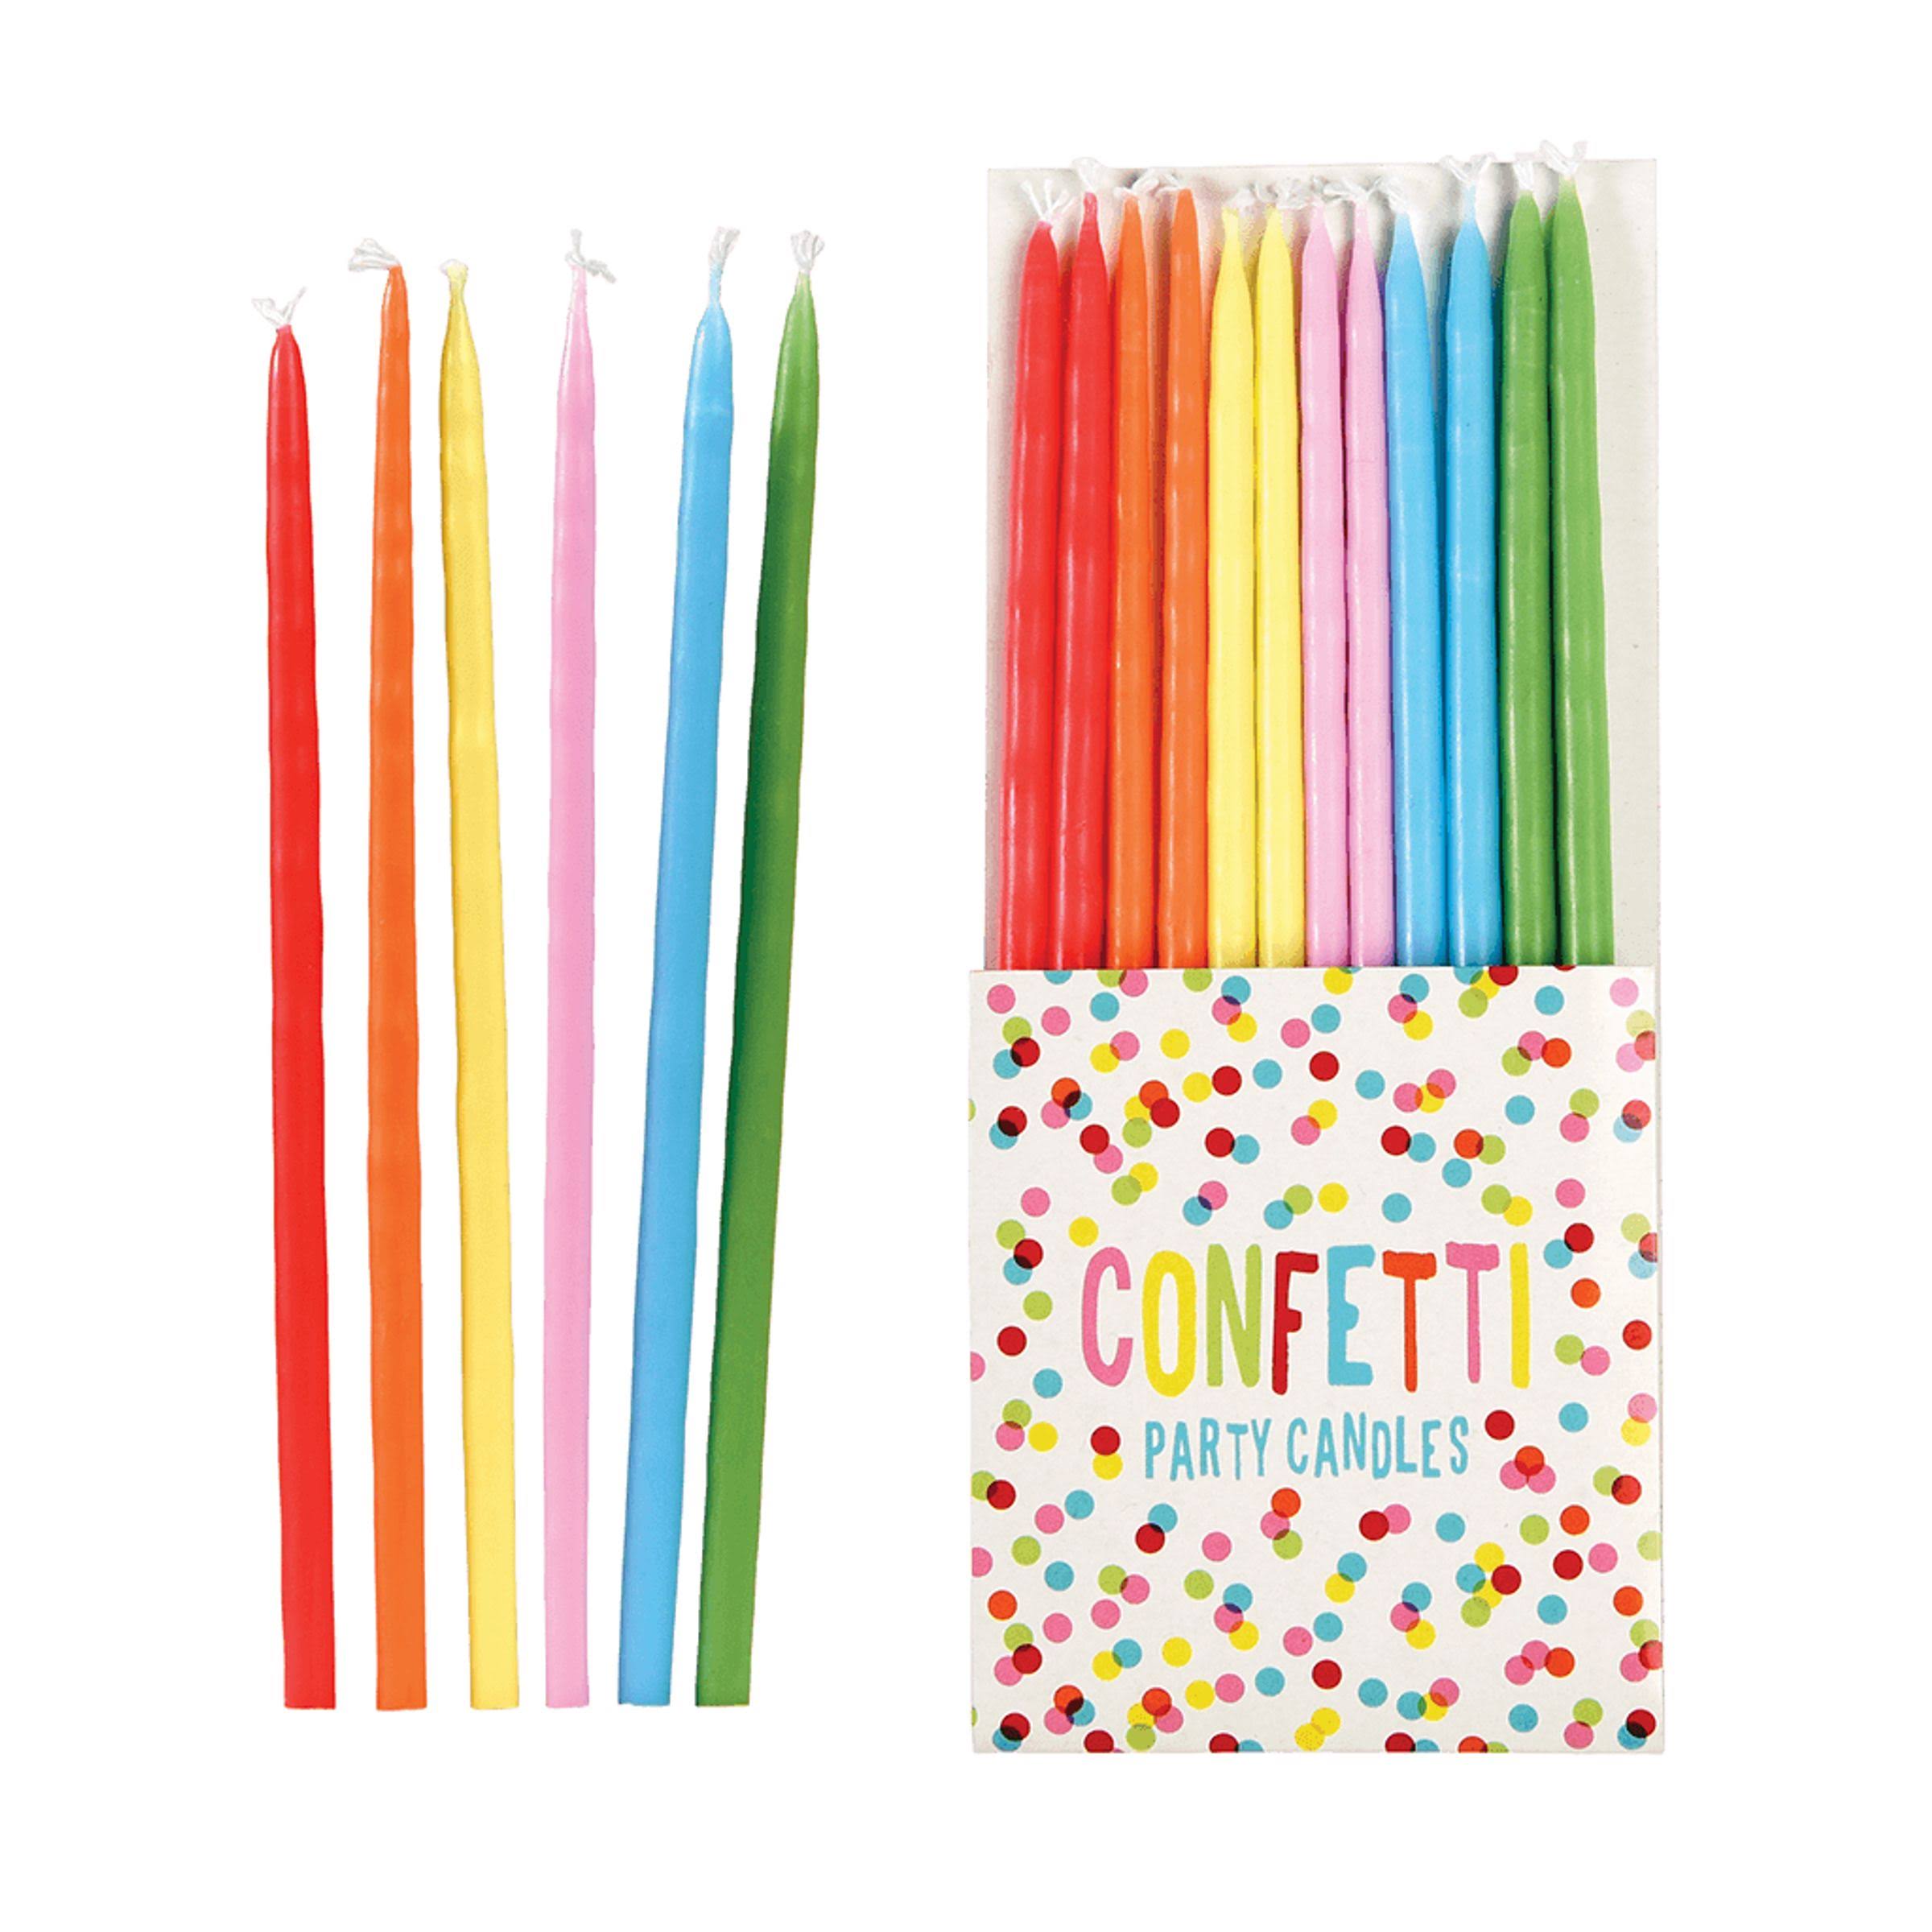 Pack of 12 Large Confetti Candles